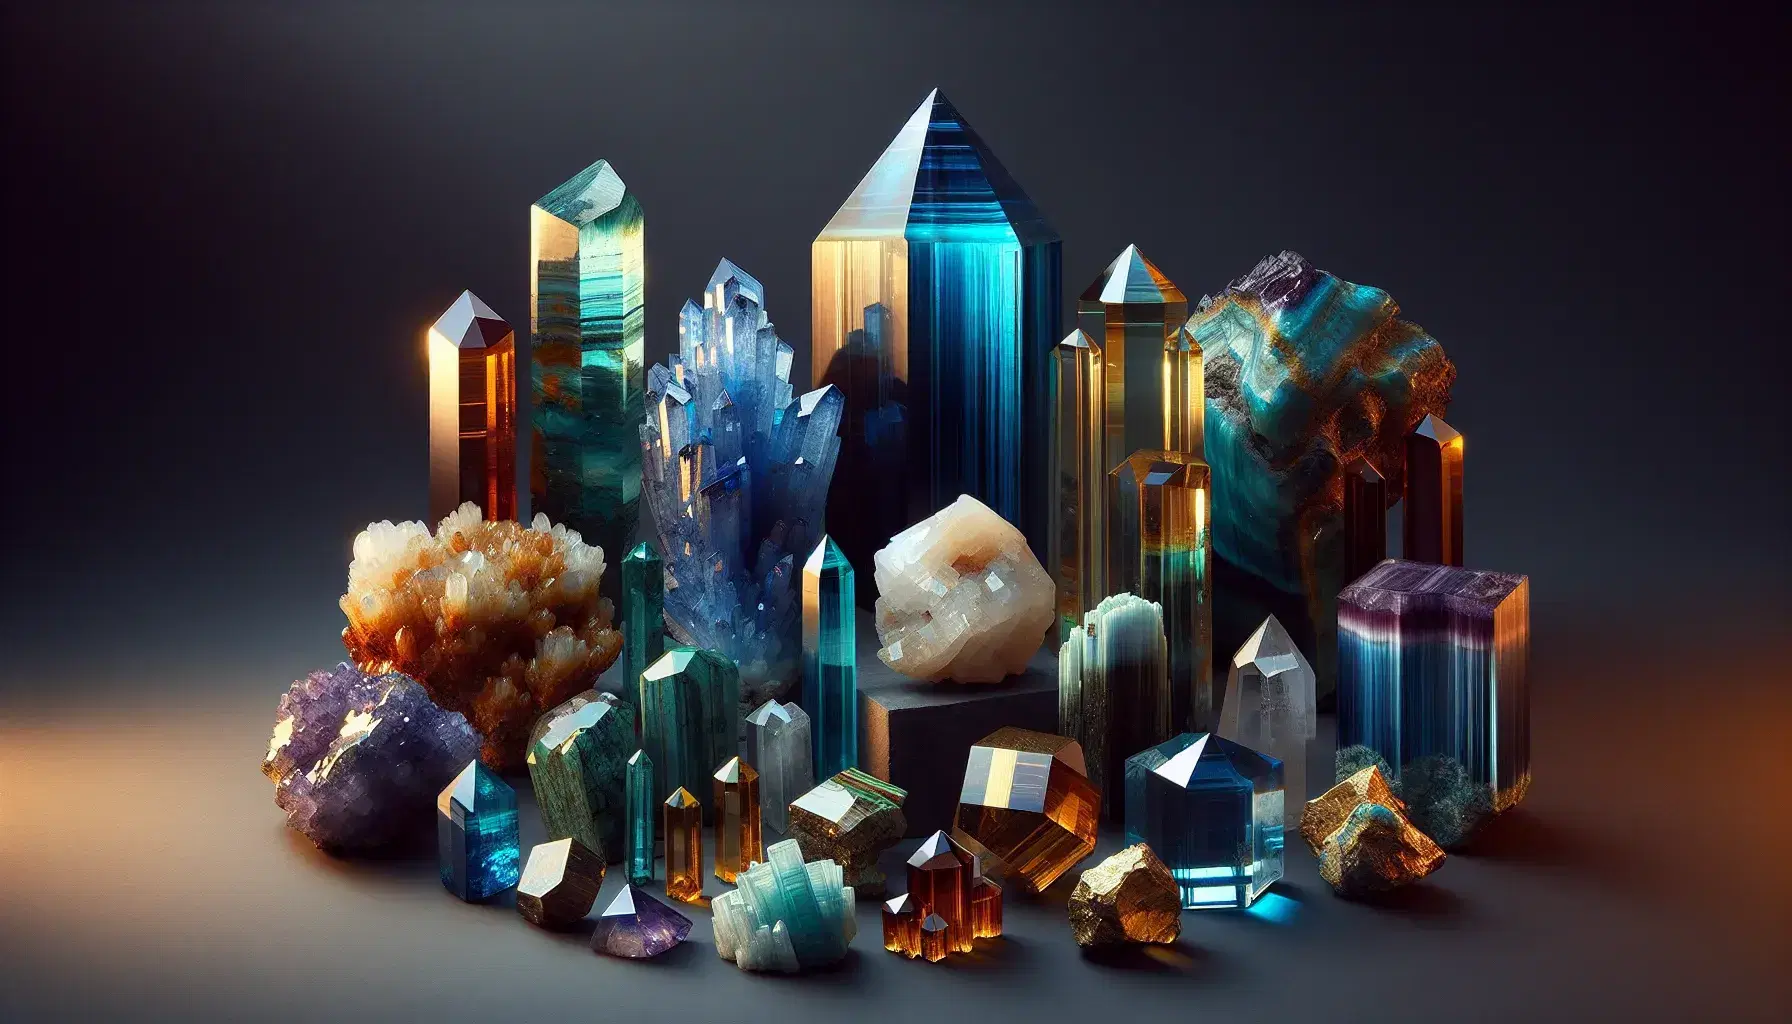 Collection of colorful minerals on a black background, with crystals of blue azurite, translucent quartz, yellow pyrite, green malachite and red-orange garnet.